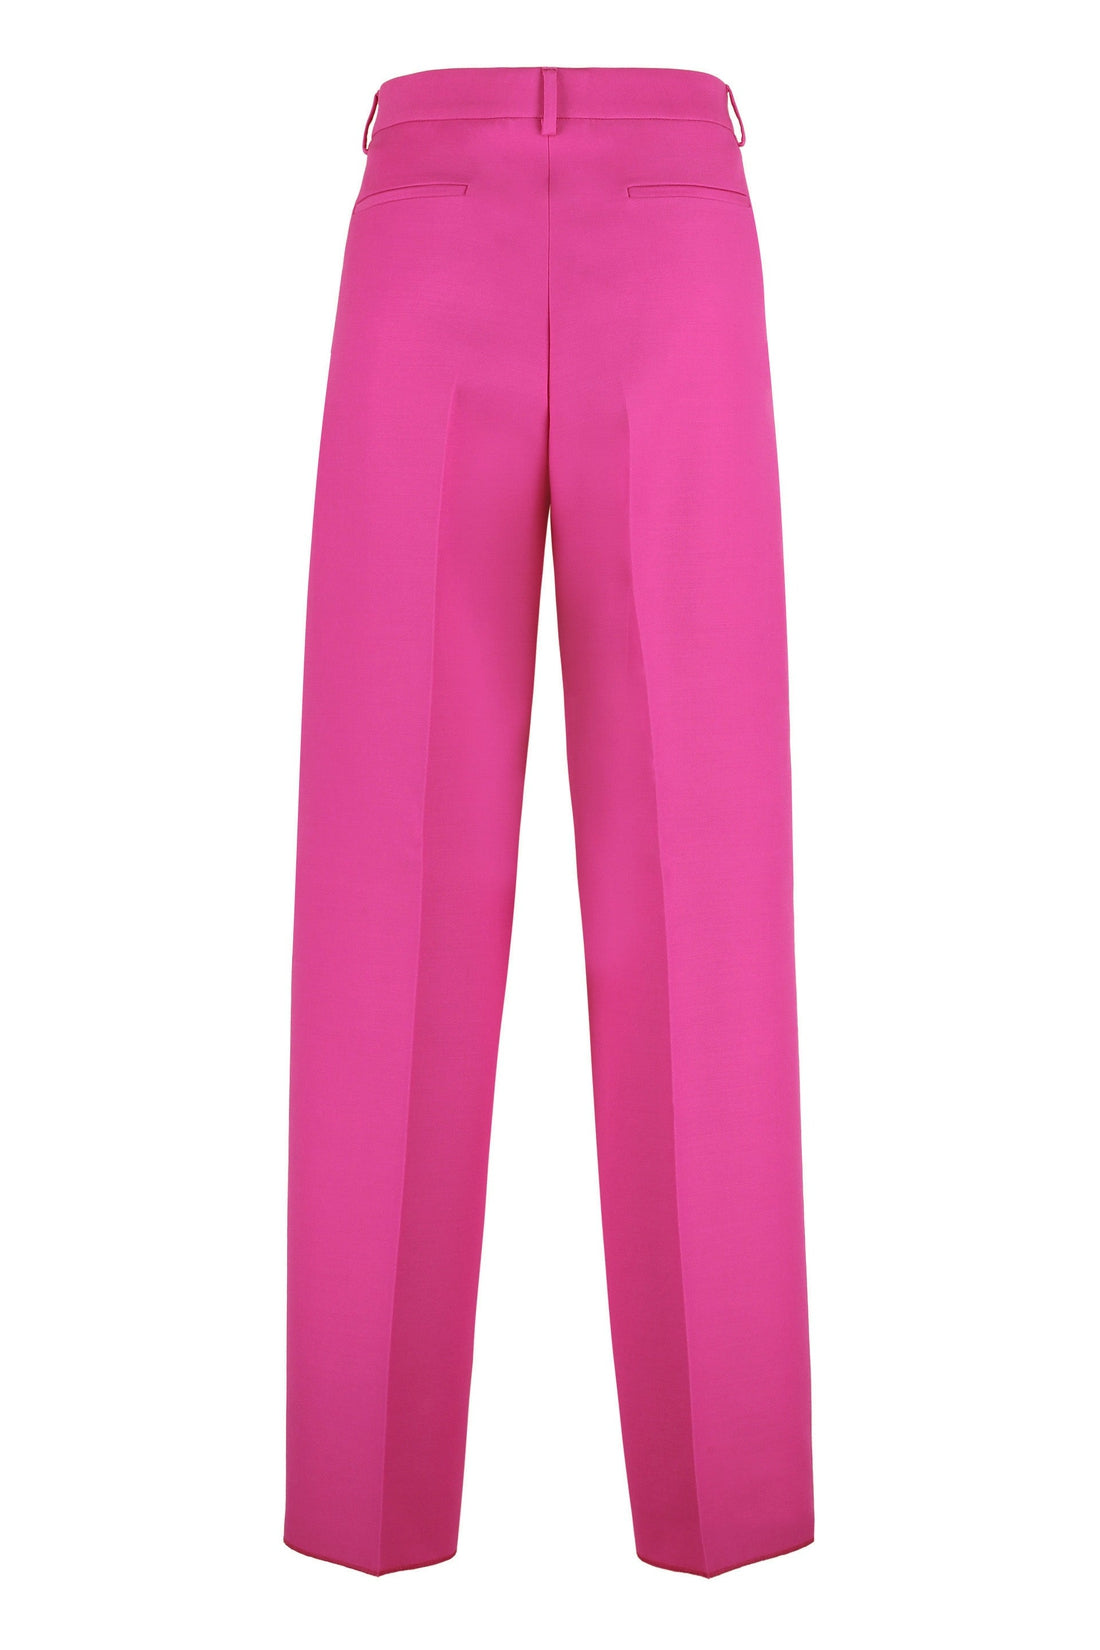 Valentino-OUTLET-SALE-Tailored wool trousers-ARCHIVIST